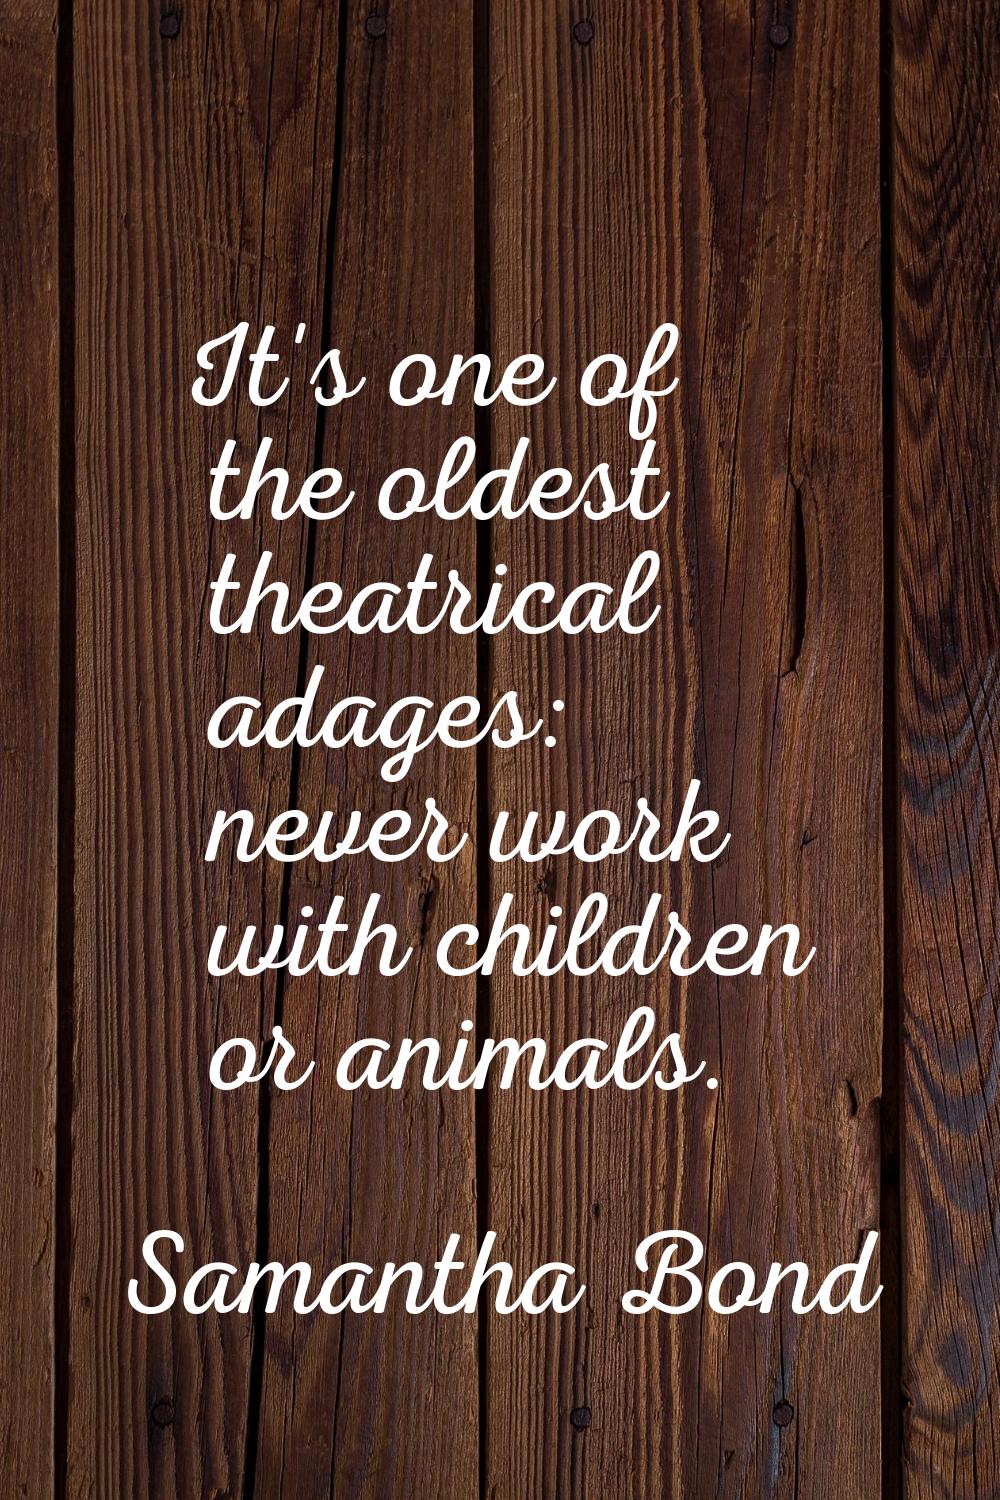 It's one of the oldest theatrical adages: never work with children or animals.